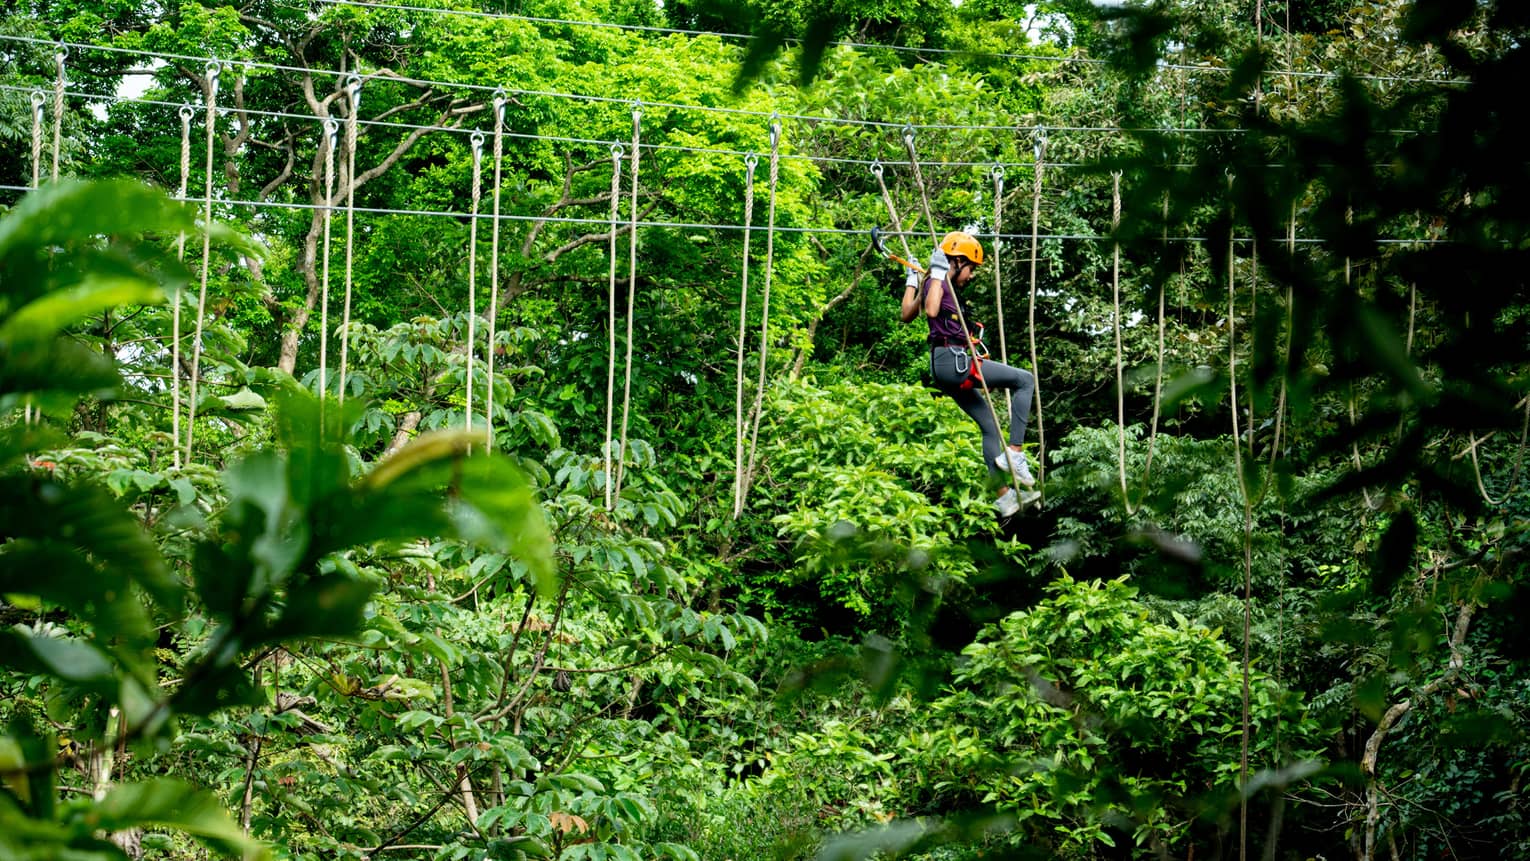 A person wearing a yellow helmet and dark clothing swings on an aerial ropes course set in the lush green canopy of the Costa Rica rainforest